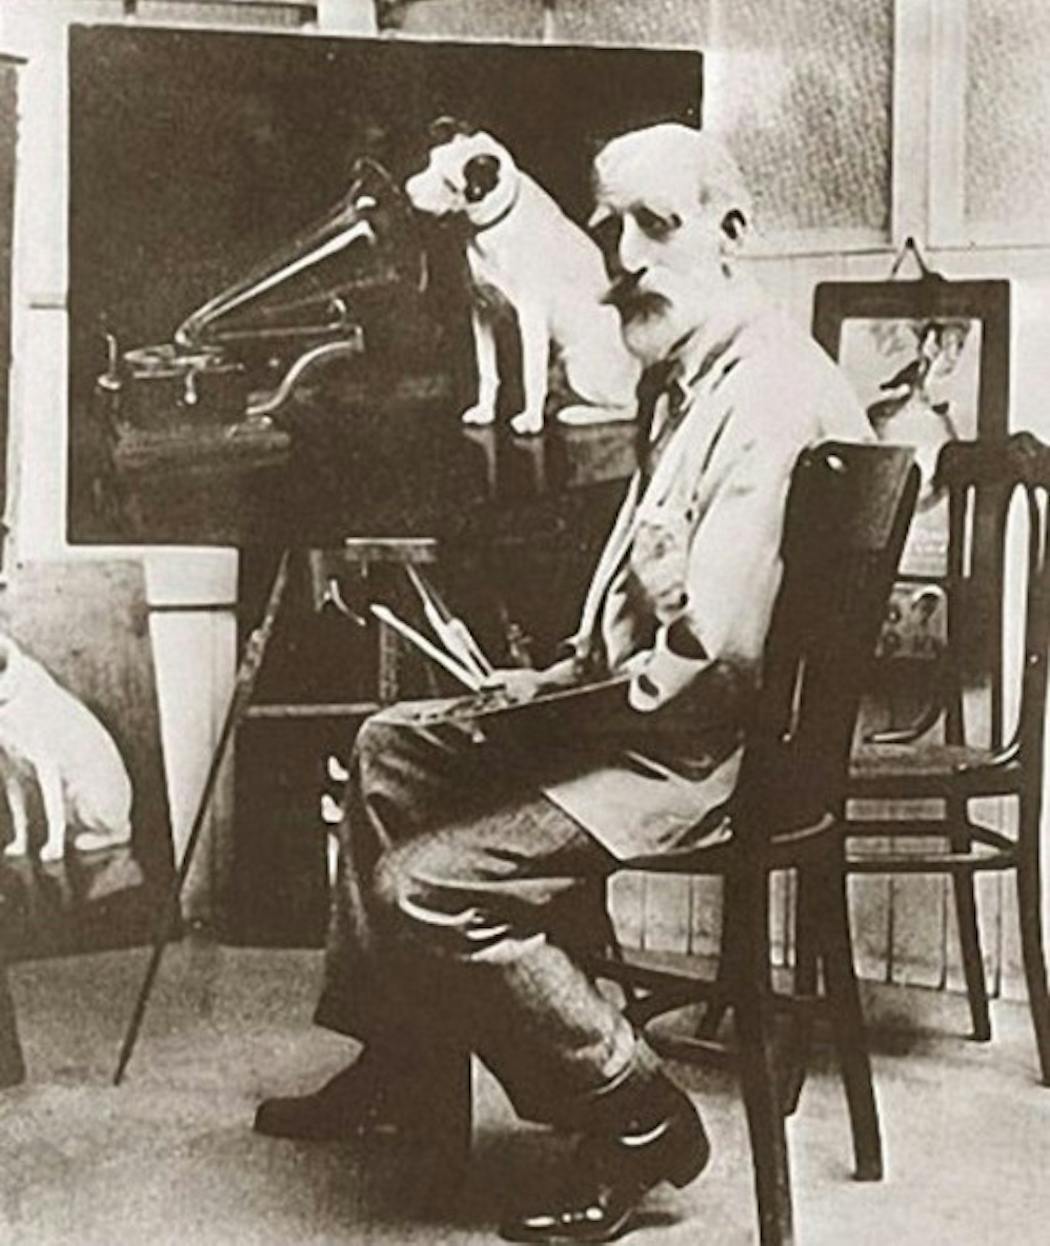 Francis Barraud painting Nipper the dog, reflecting the Gramophone disk version.